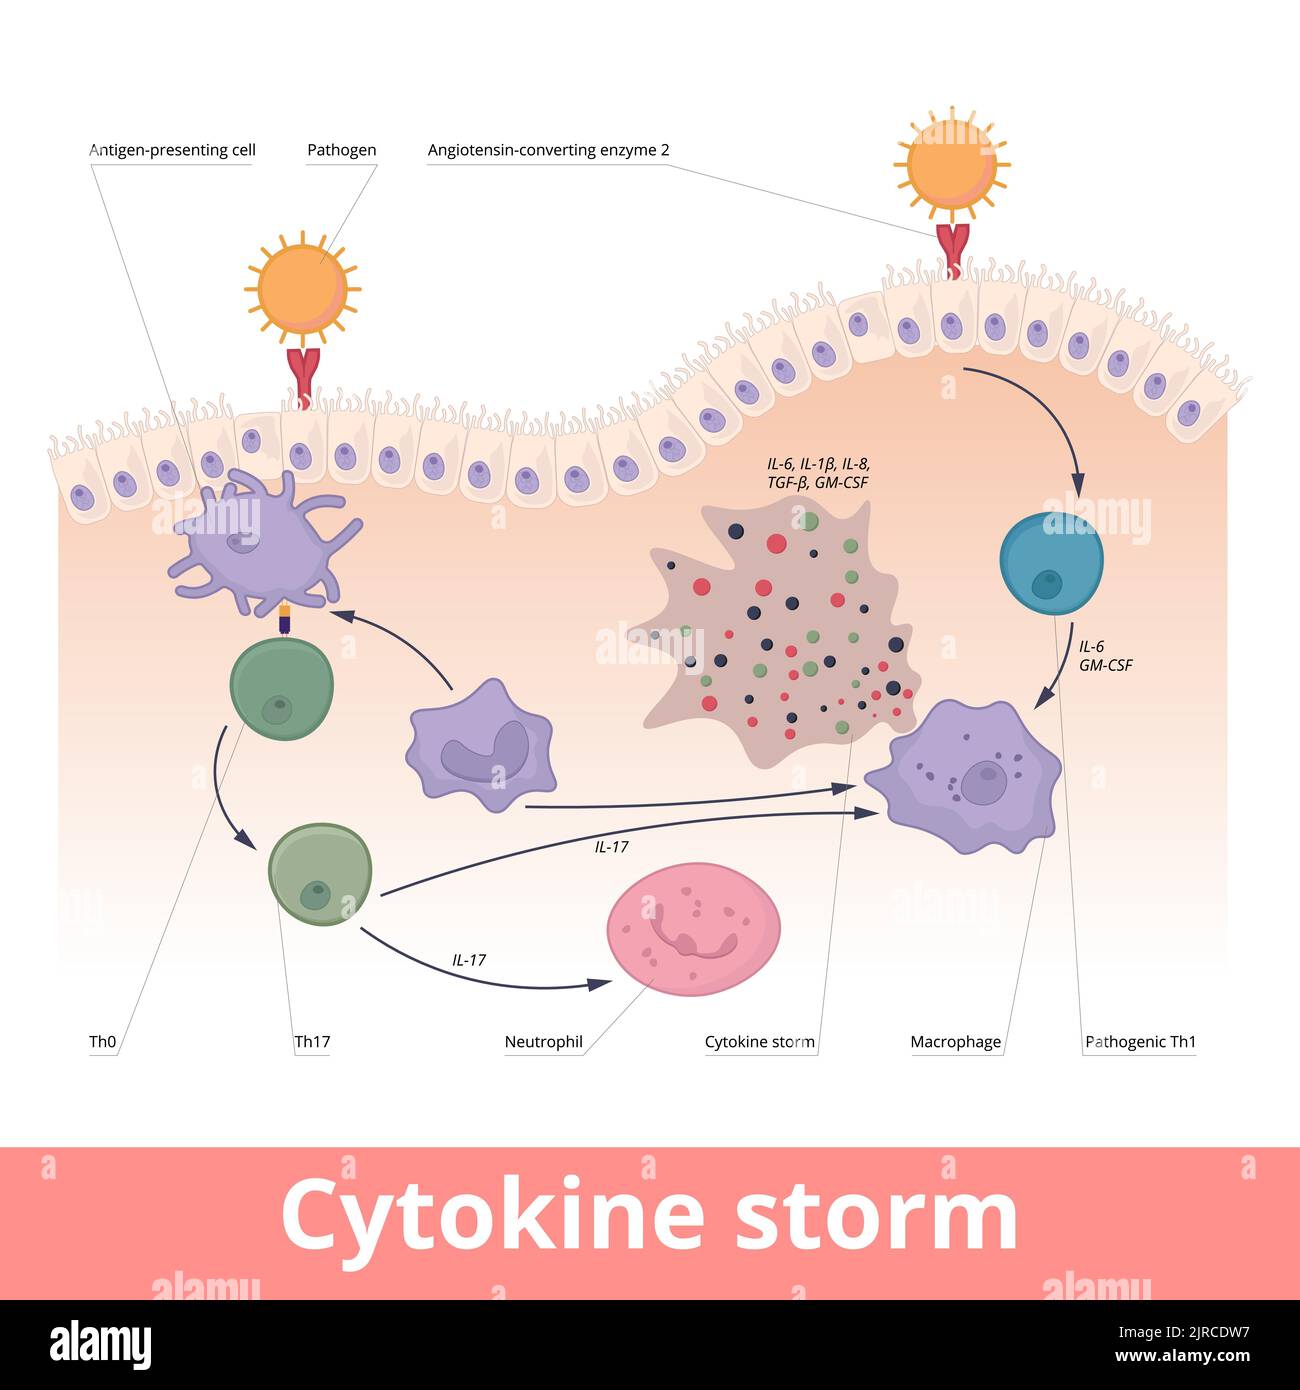 Cytokine storm. Hypercytokinemia during which the immune system causes a release of cytokines with help of macrophages, t helper cells, neutrophils. Stock Vector